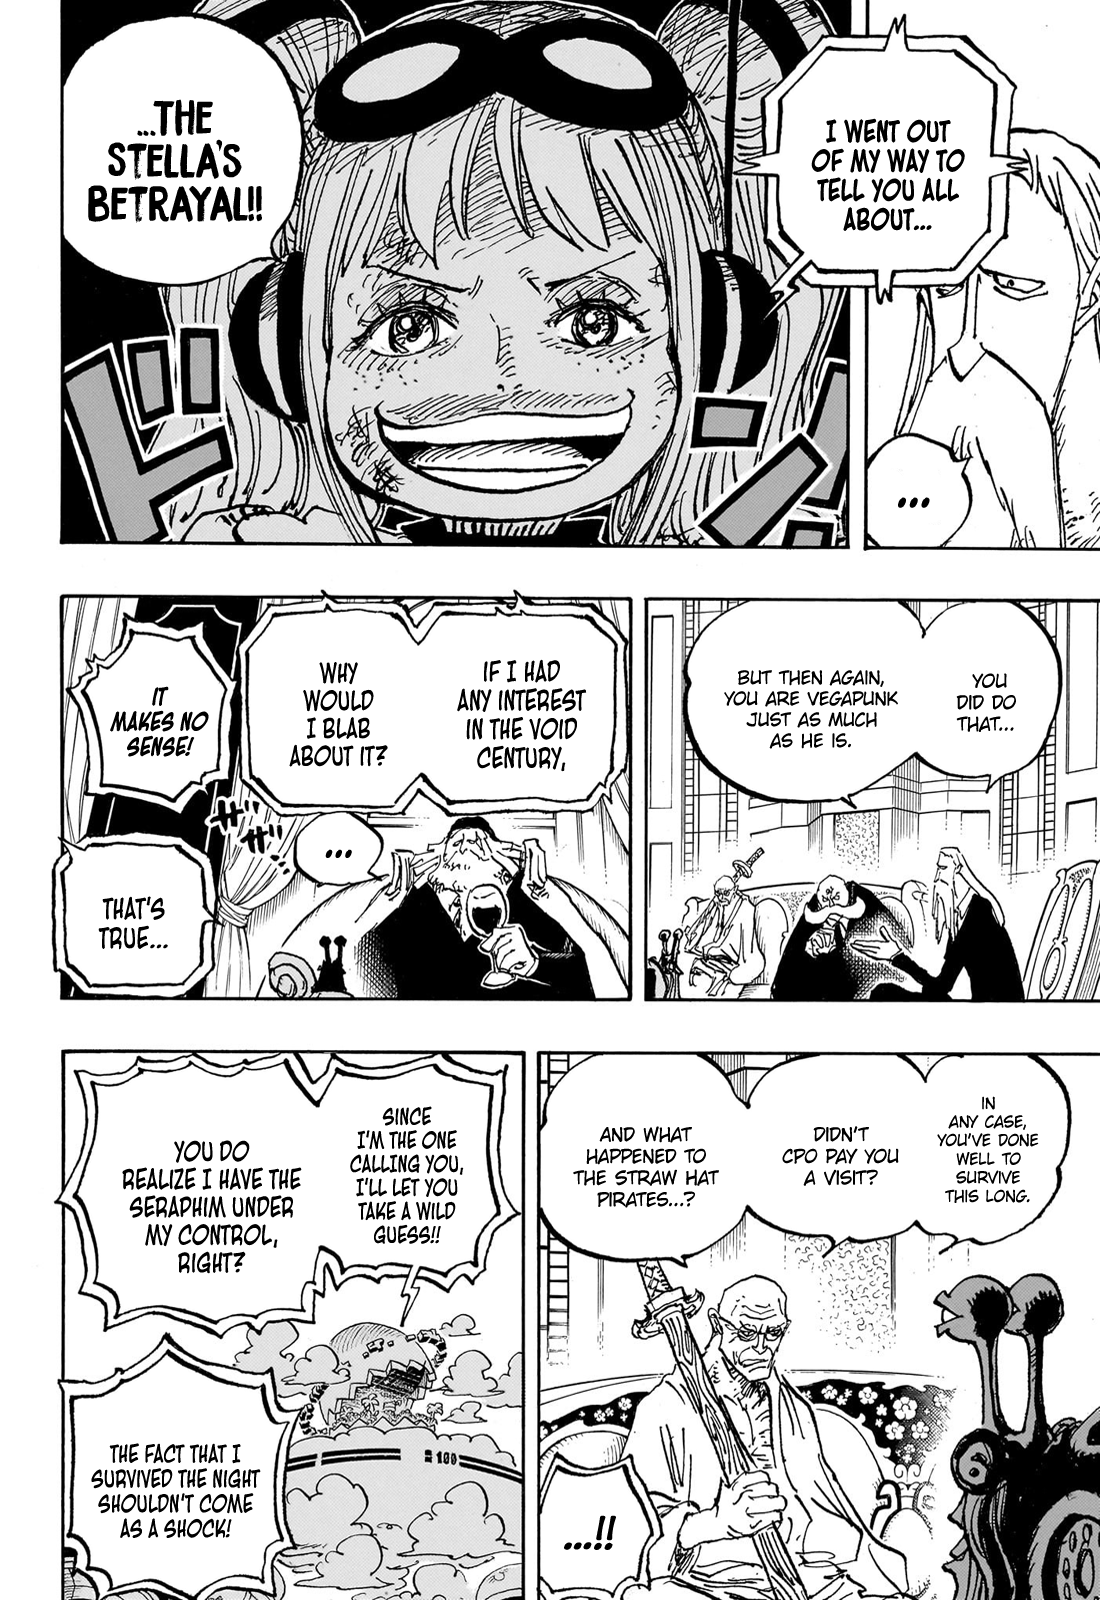 One Piece, Chapter 1089 | TcbScans Org - Free Manga Online in High 